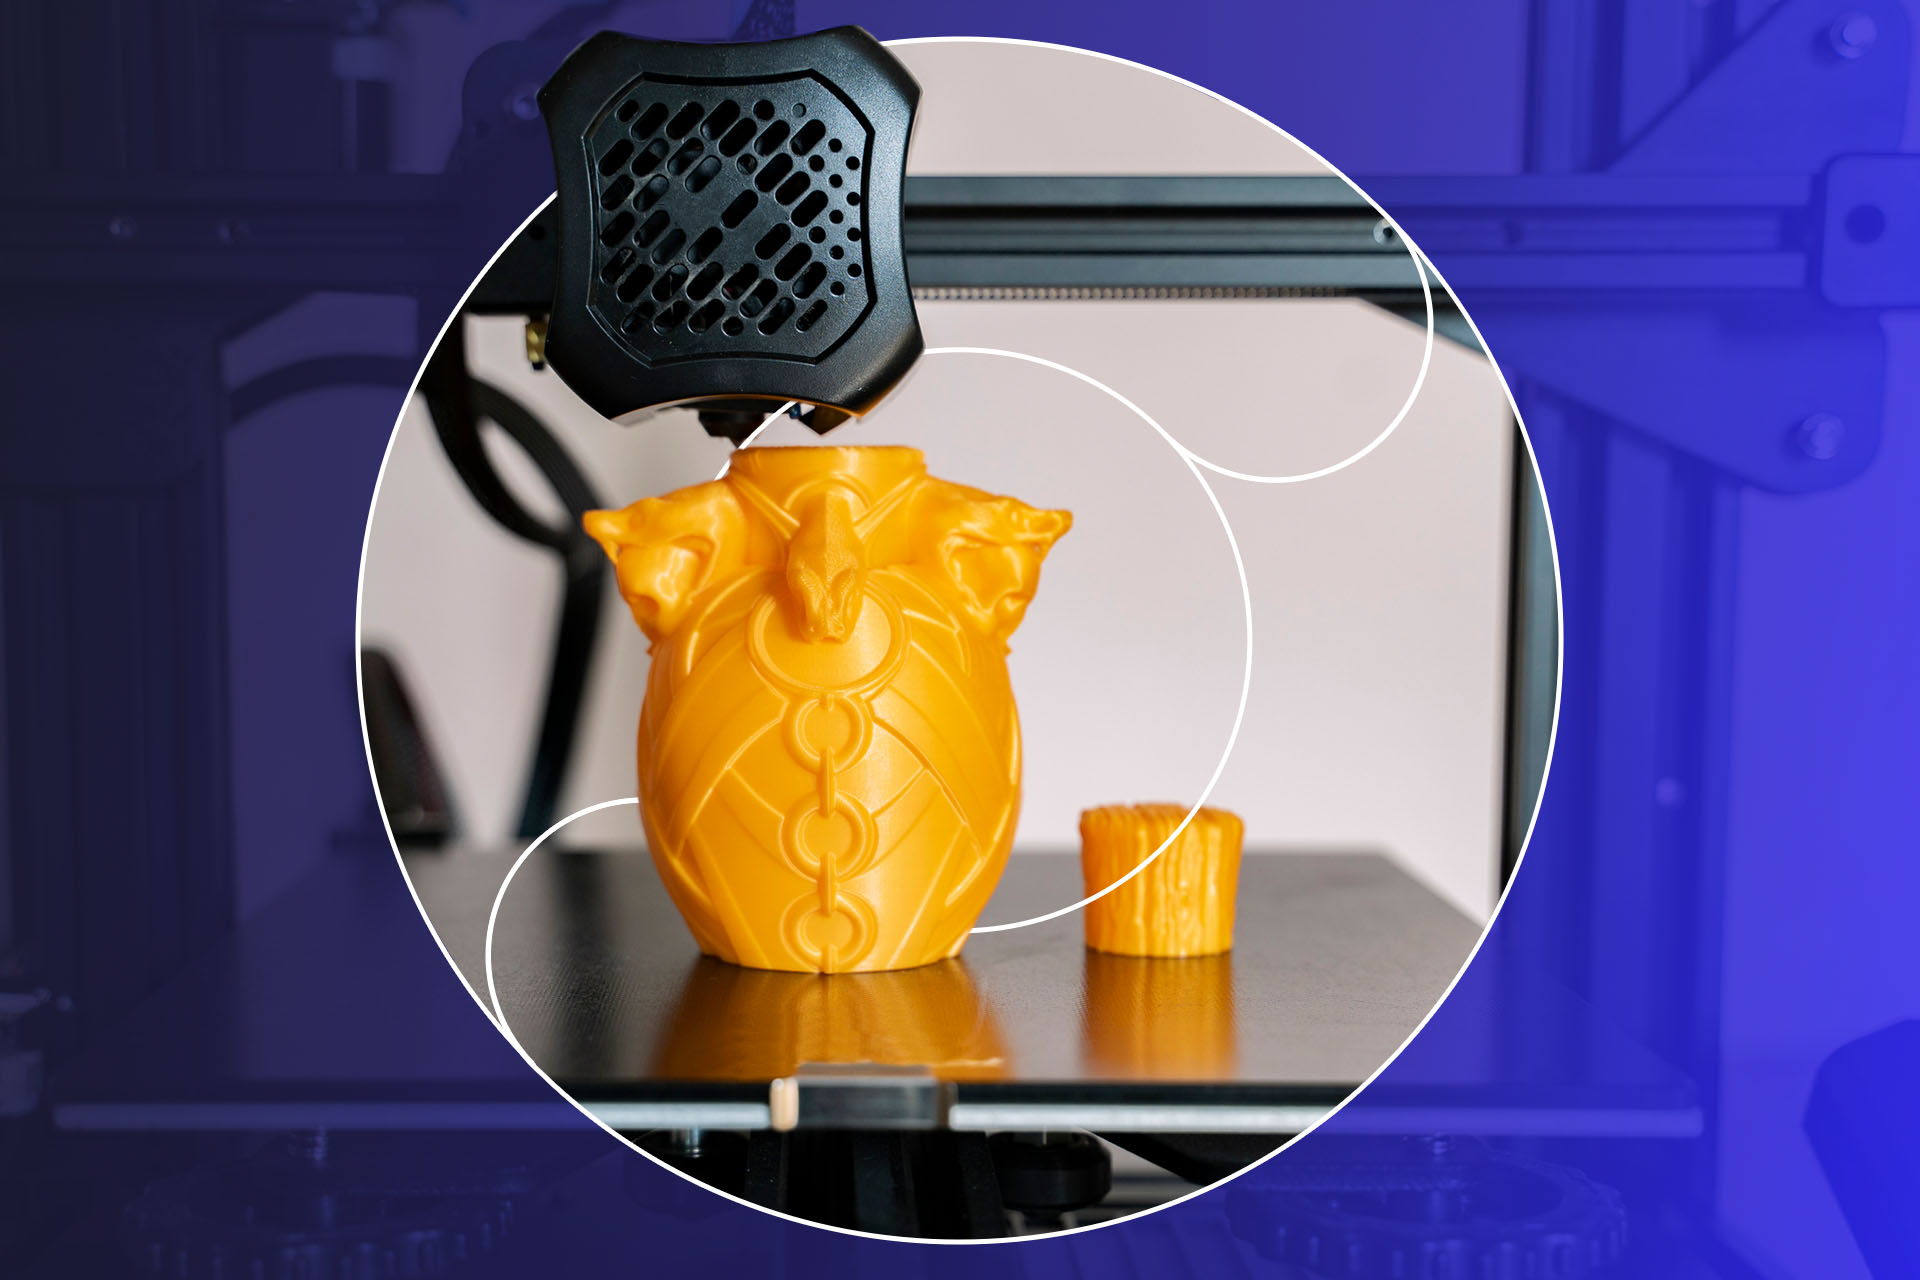 When Will Affordable 3D Printing Become Reality